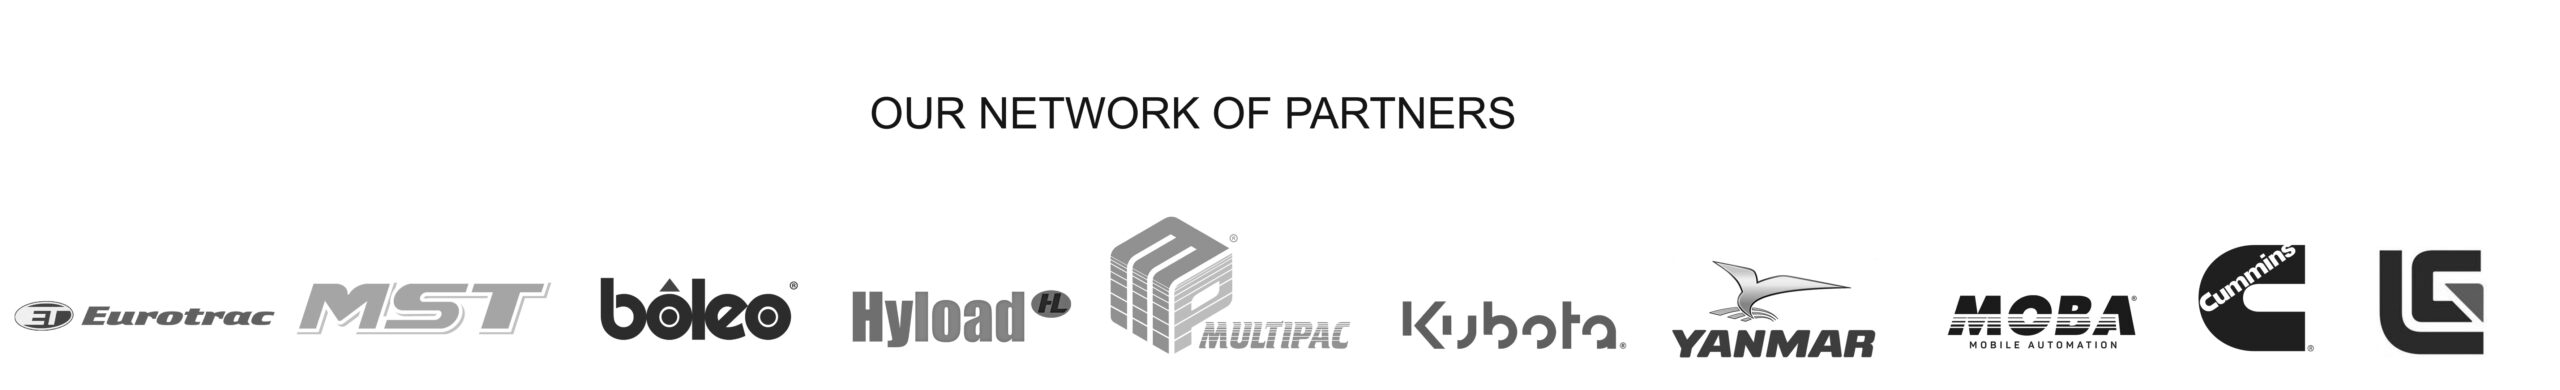 our network of partners